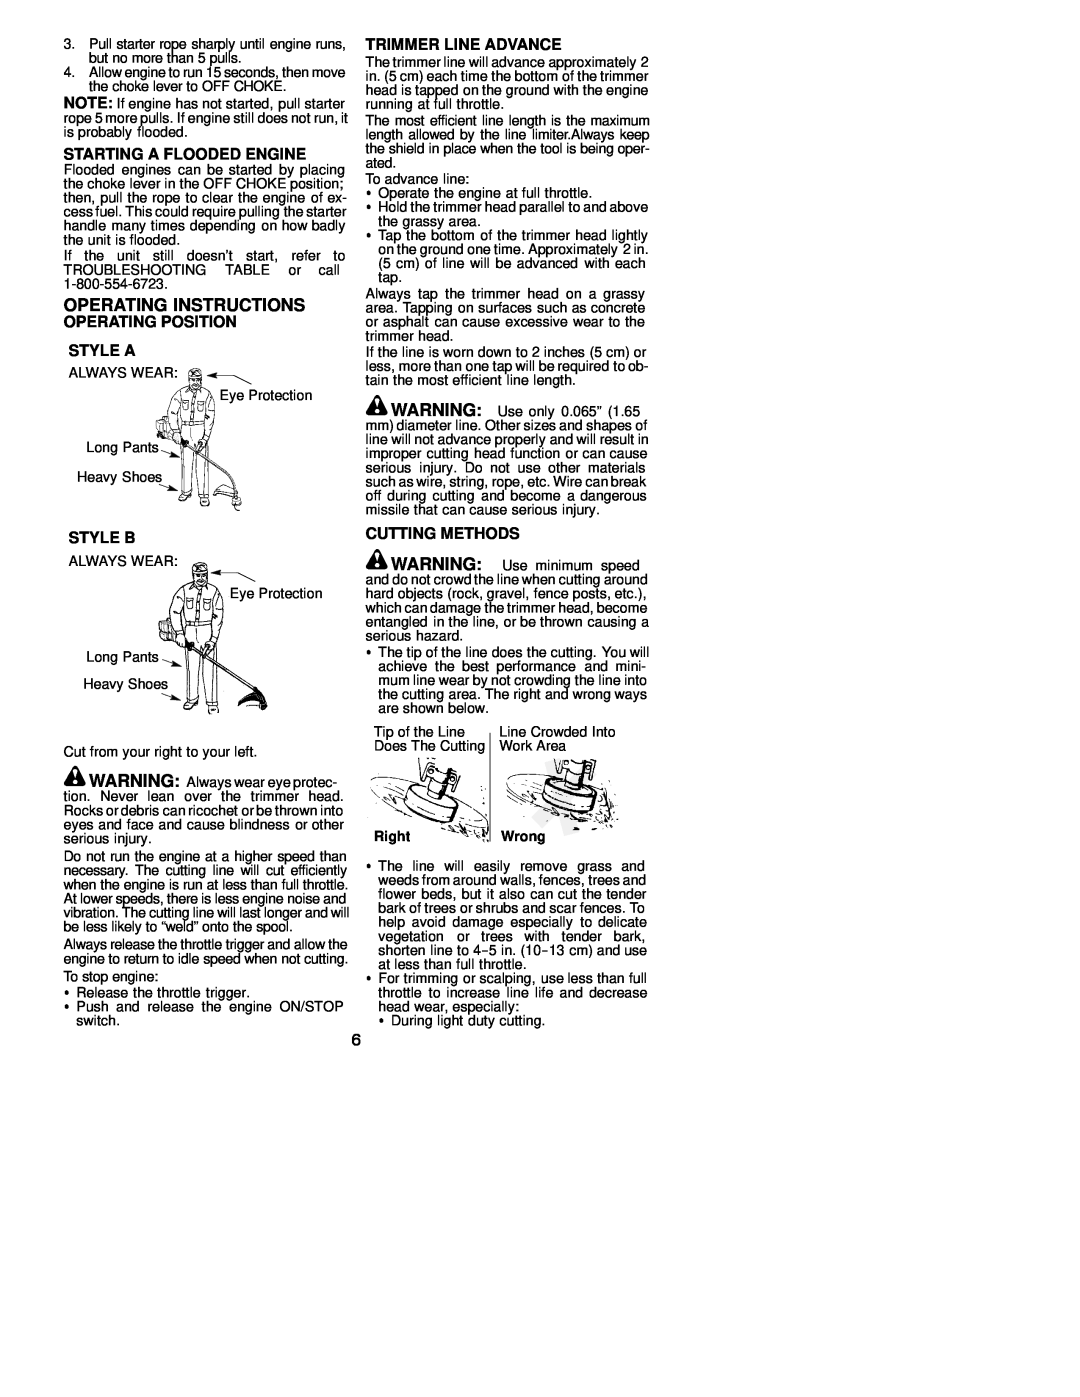 Weed Eater 530163346 Operating Instructions, Starting A Flooded Engine, Operating Position Style A, Trimmer Line Advance 